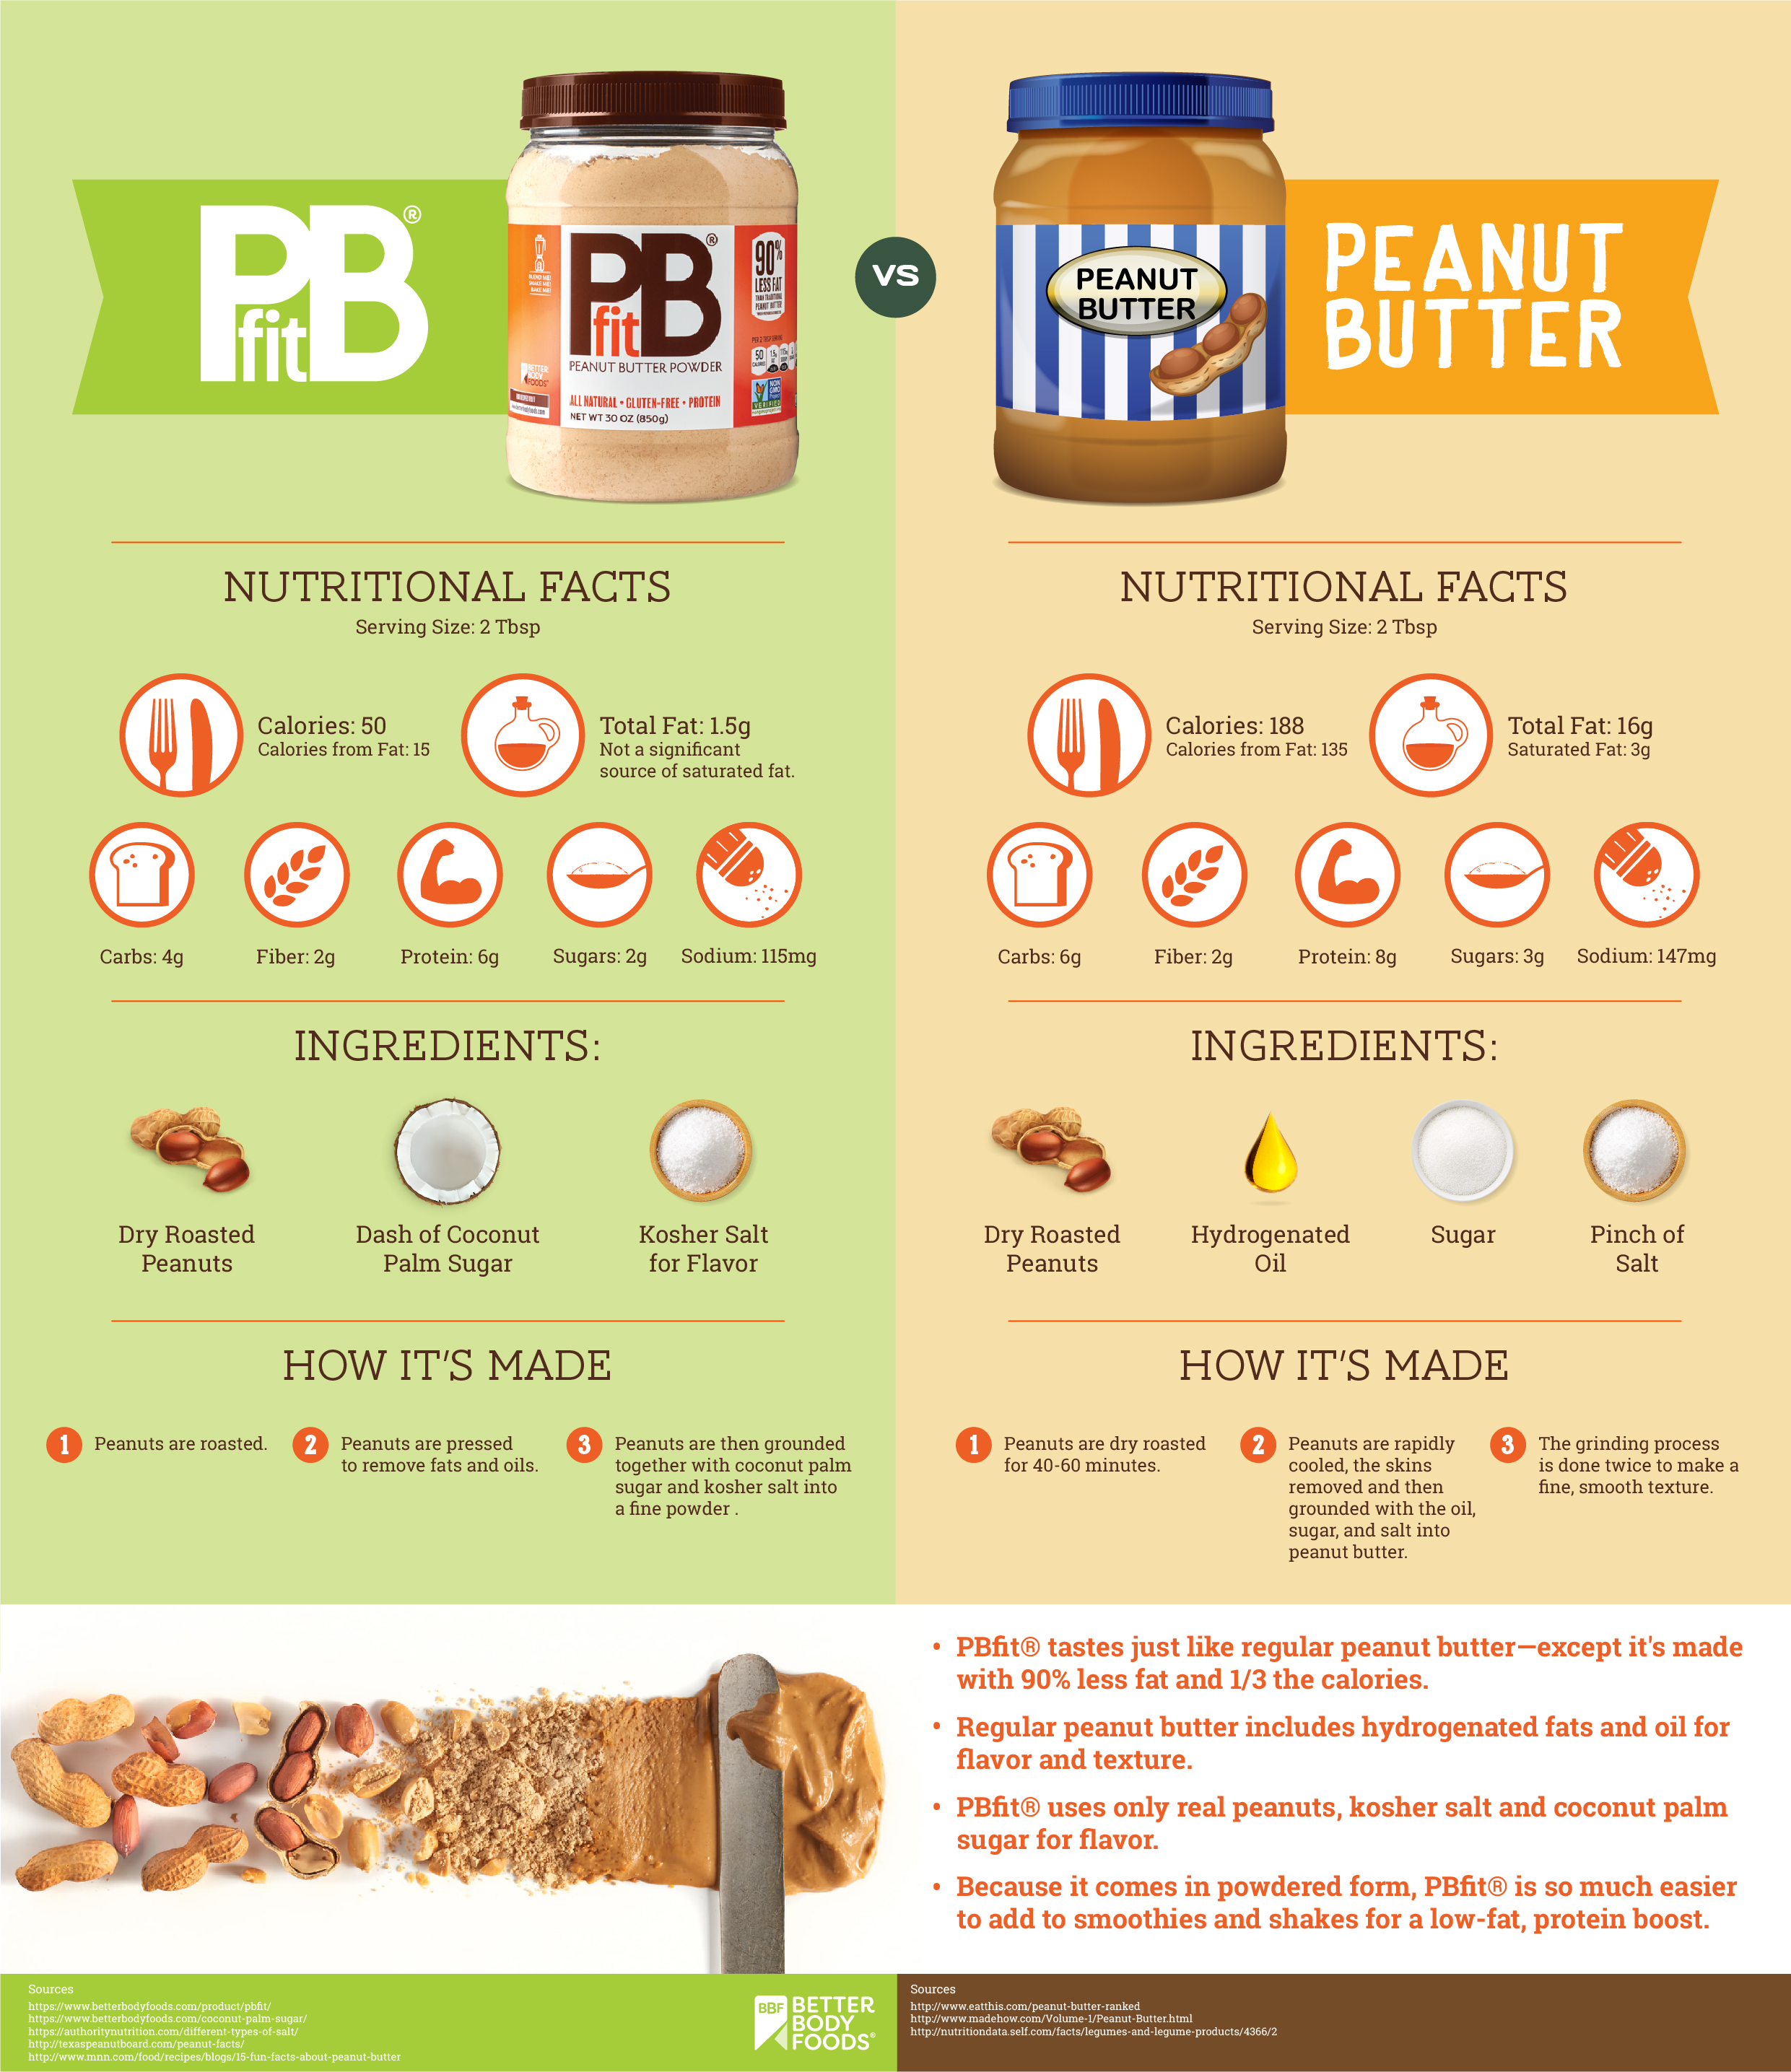 Powdered Peanut Butter or Peanut Butter? - Infographic